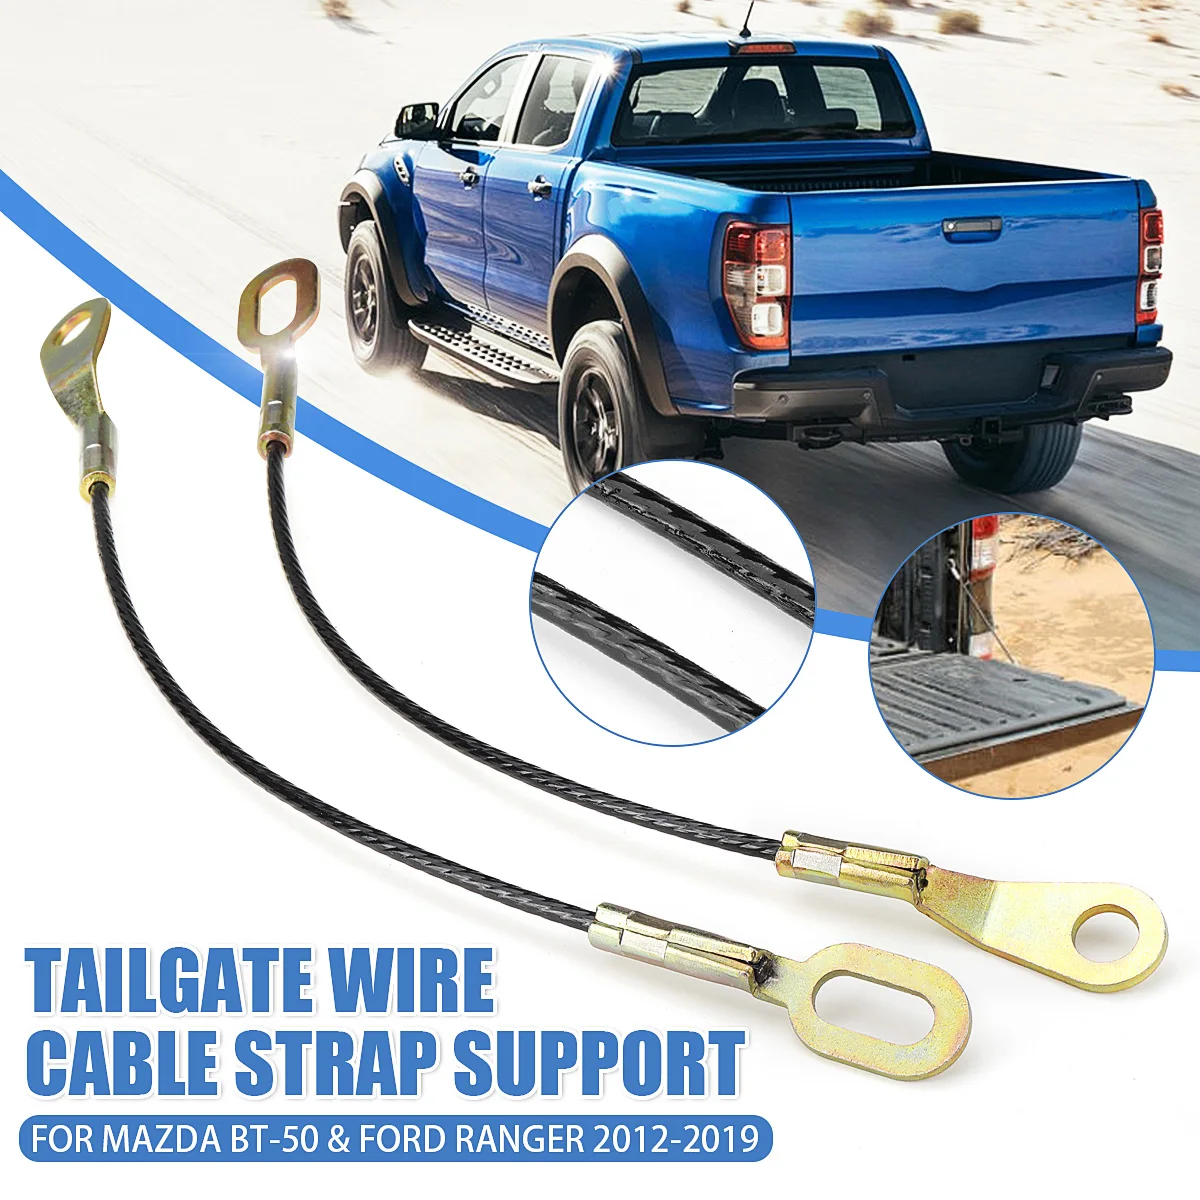 Cutogain 1 Pair Tailgate Tail Gate Cables Set for Ford Ranger 1993-2011 Mazda Pickup Truck 